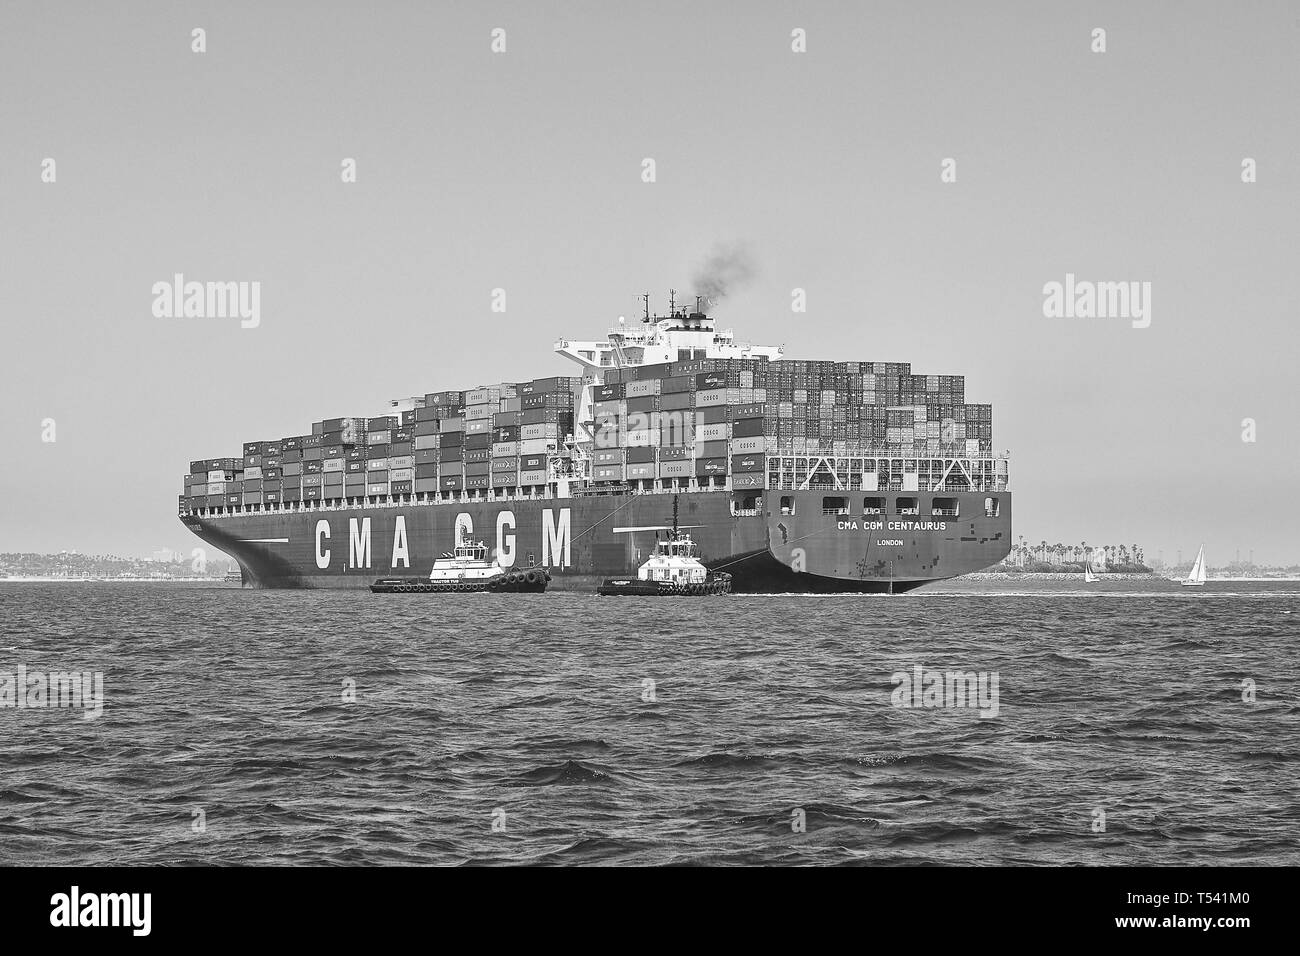 Black And White Photo Of Container Ship, CMA CGM CENTAURUS, Being Turned Through 180 Degrees By 2 Tugs Before Docking In Long Beach, California. USA. Stock Photo